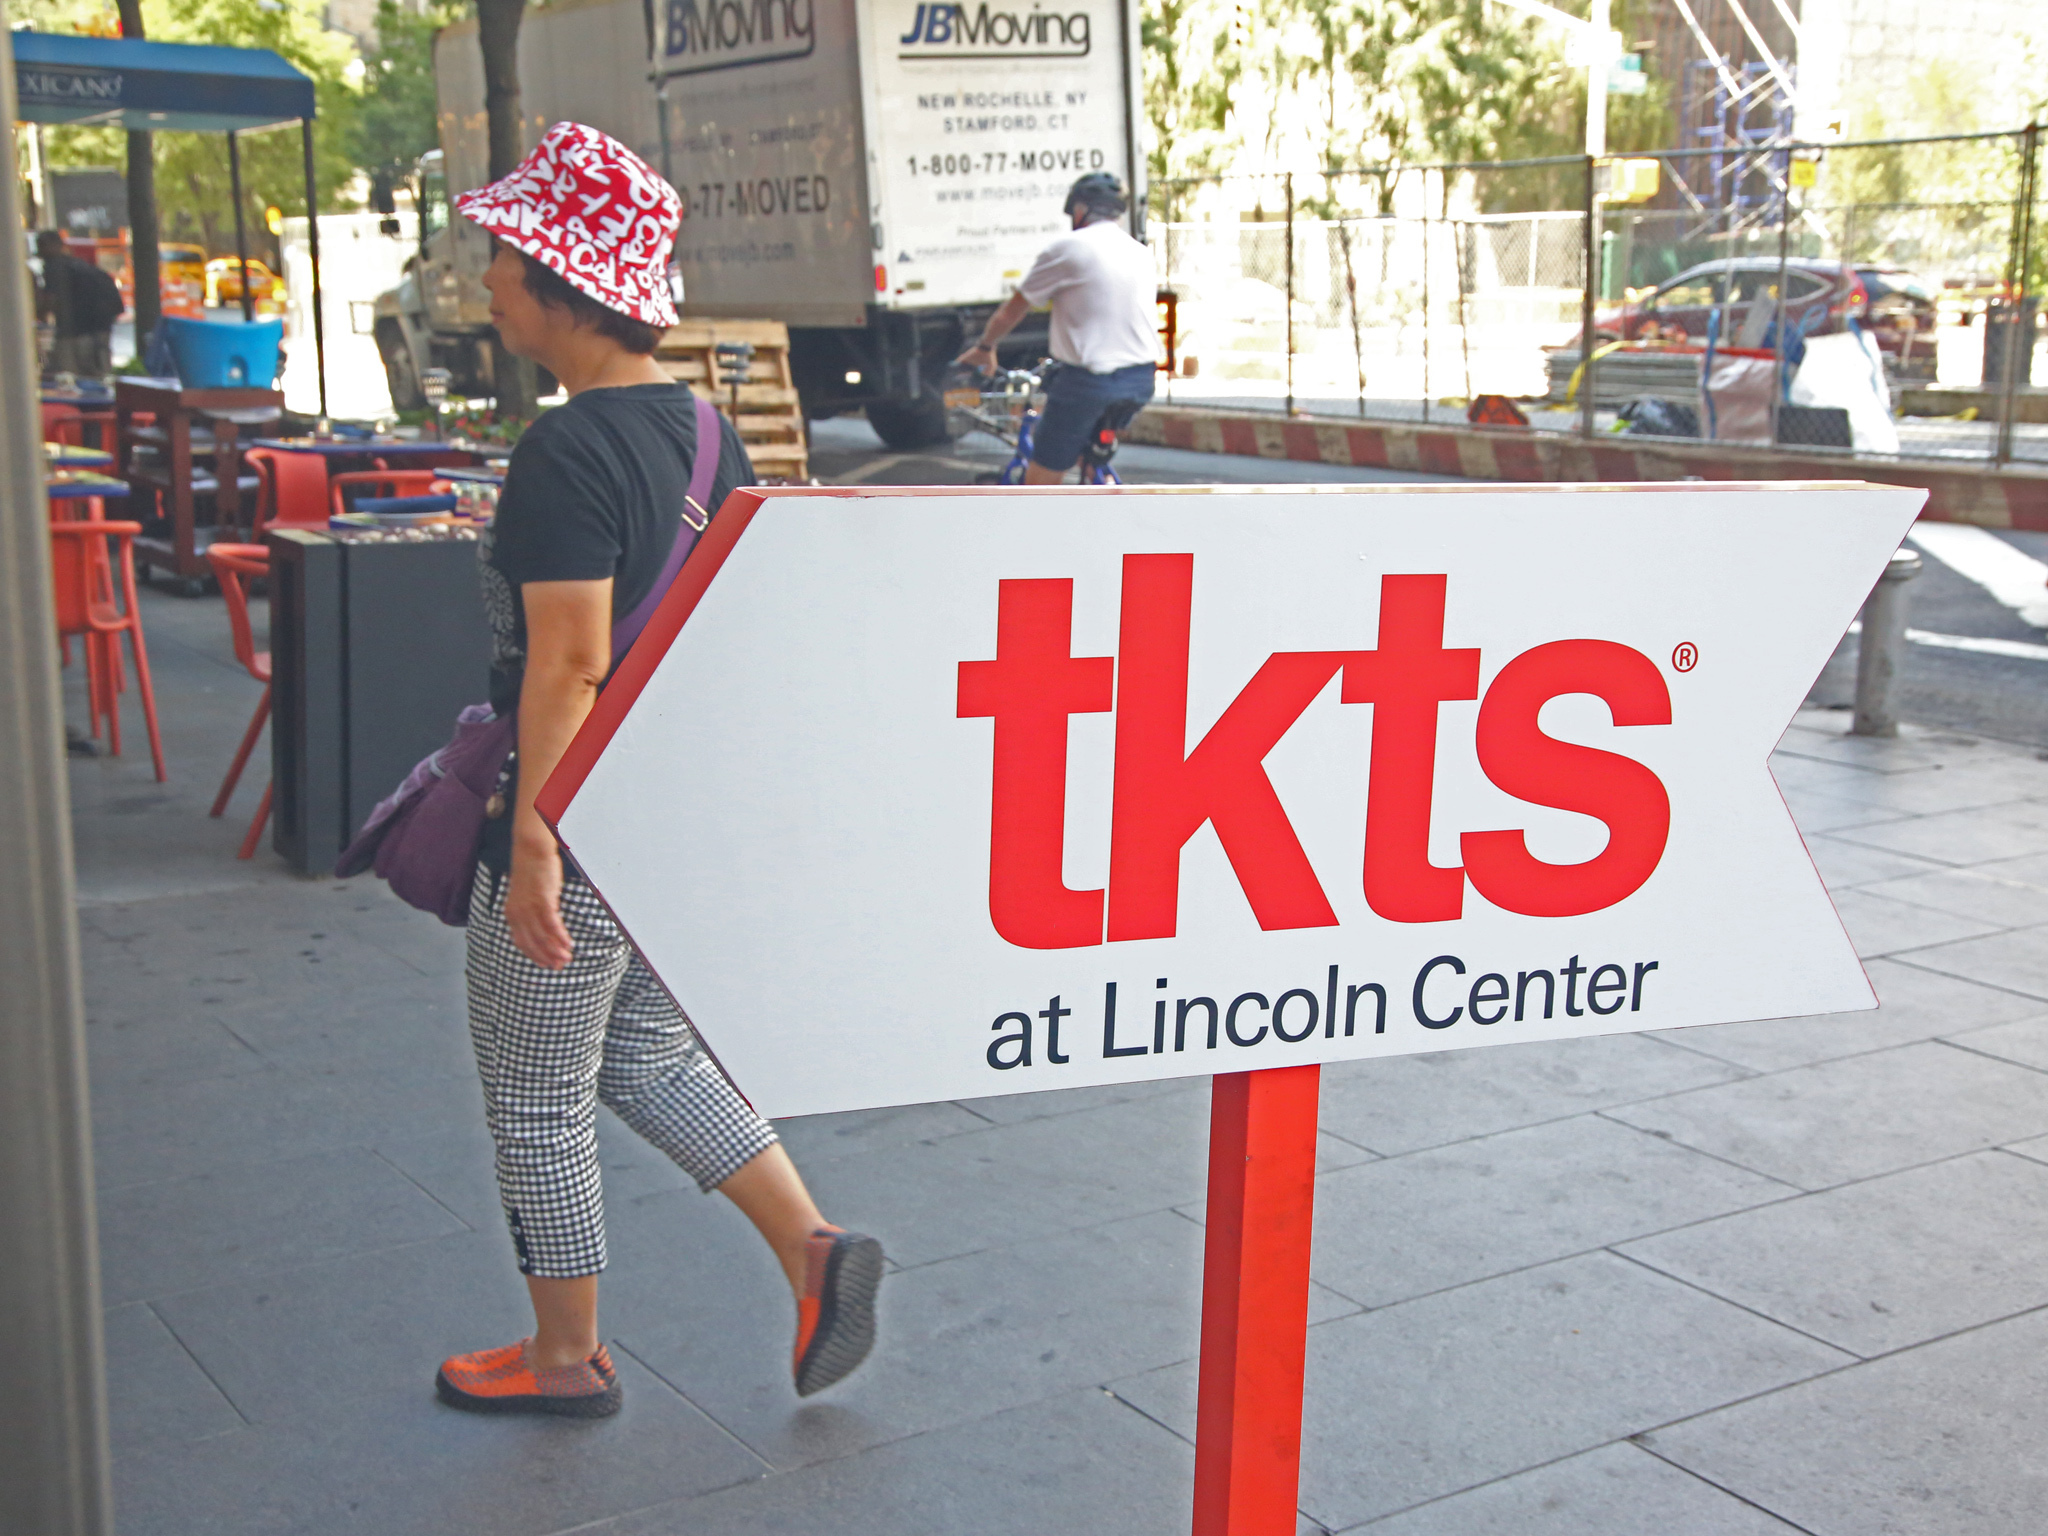 TKTS at Lincoln Center